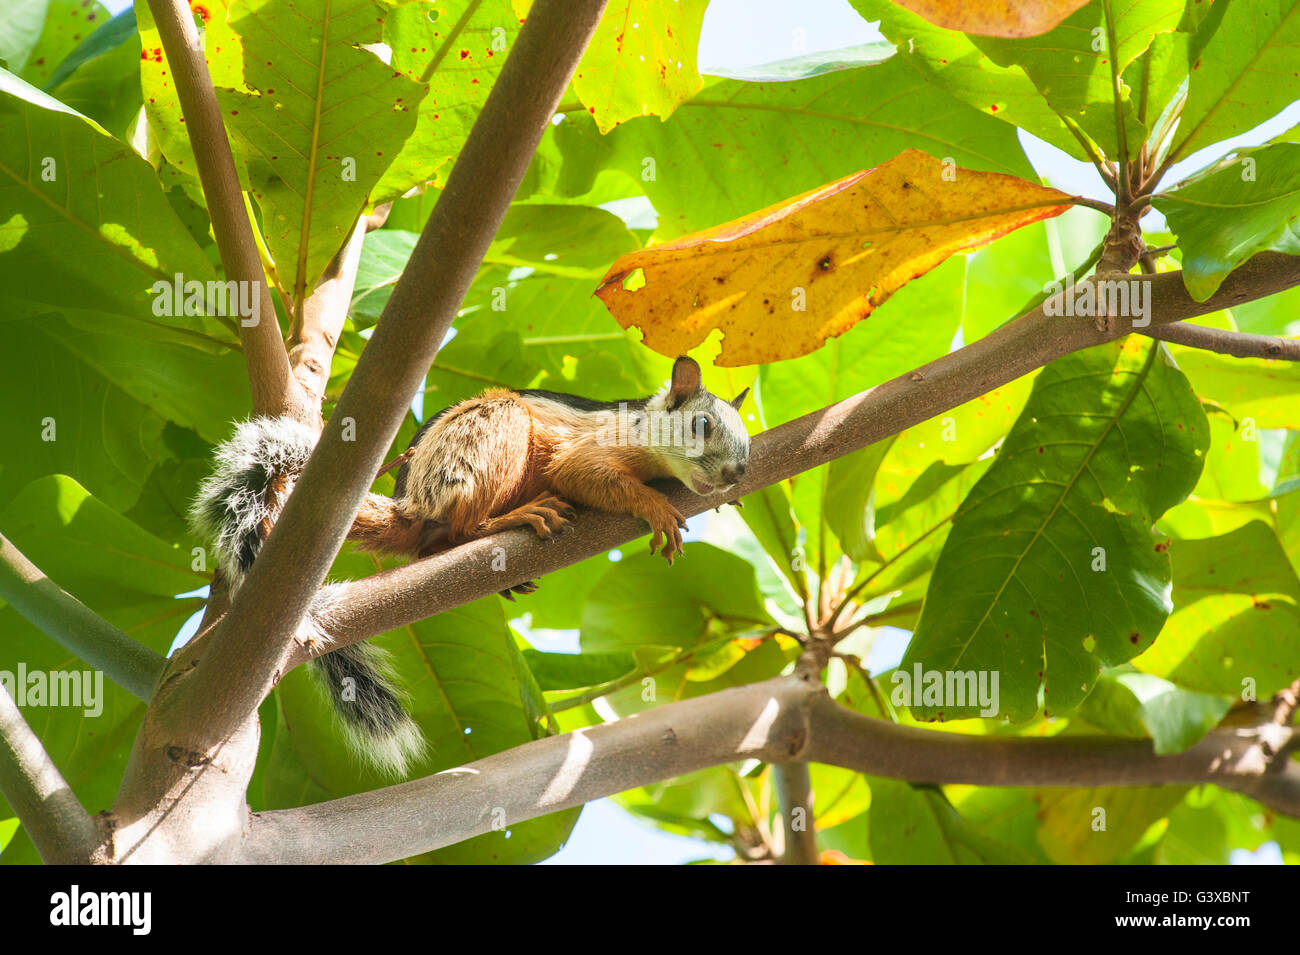 Variegated Tree Squirrel relaxes on a branch in an almond tree Stock Photo